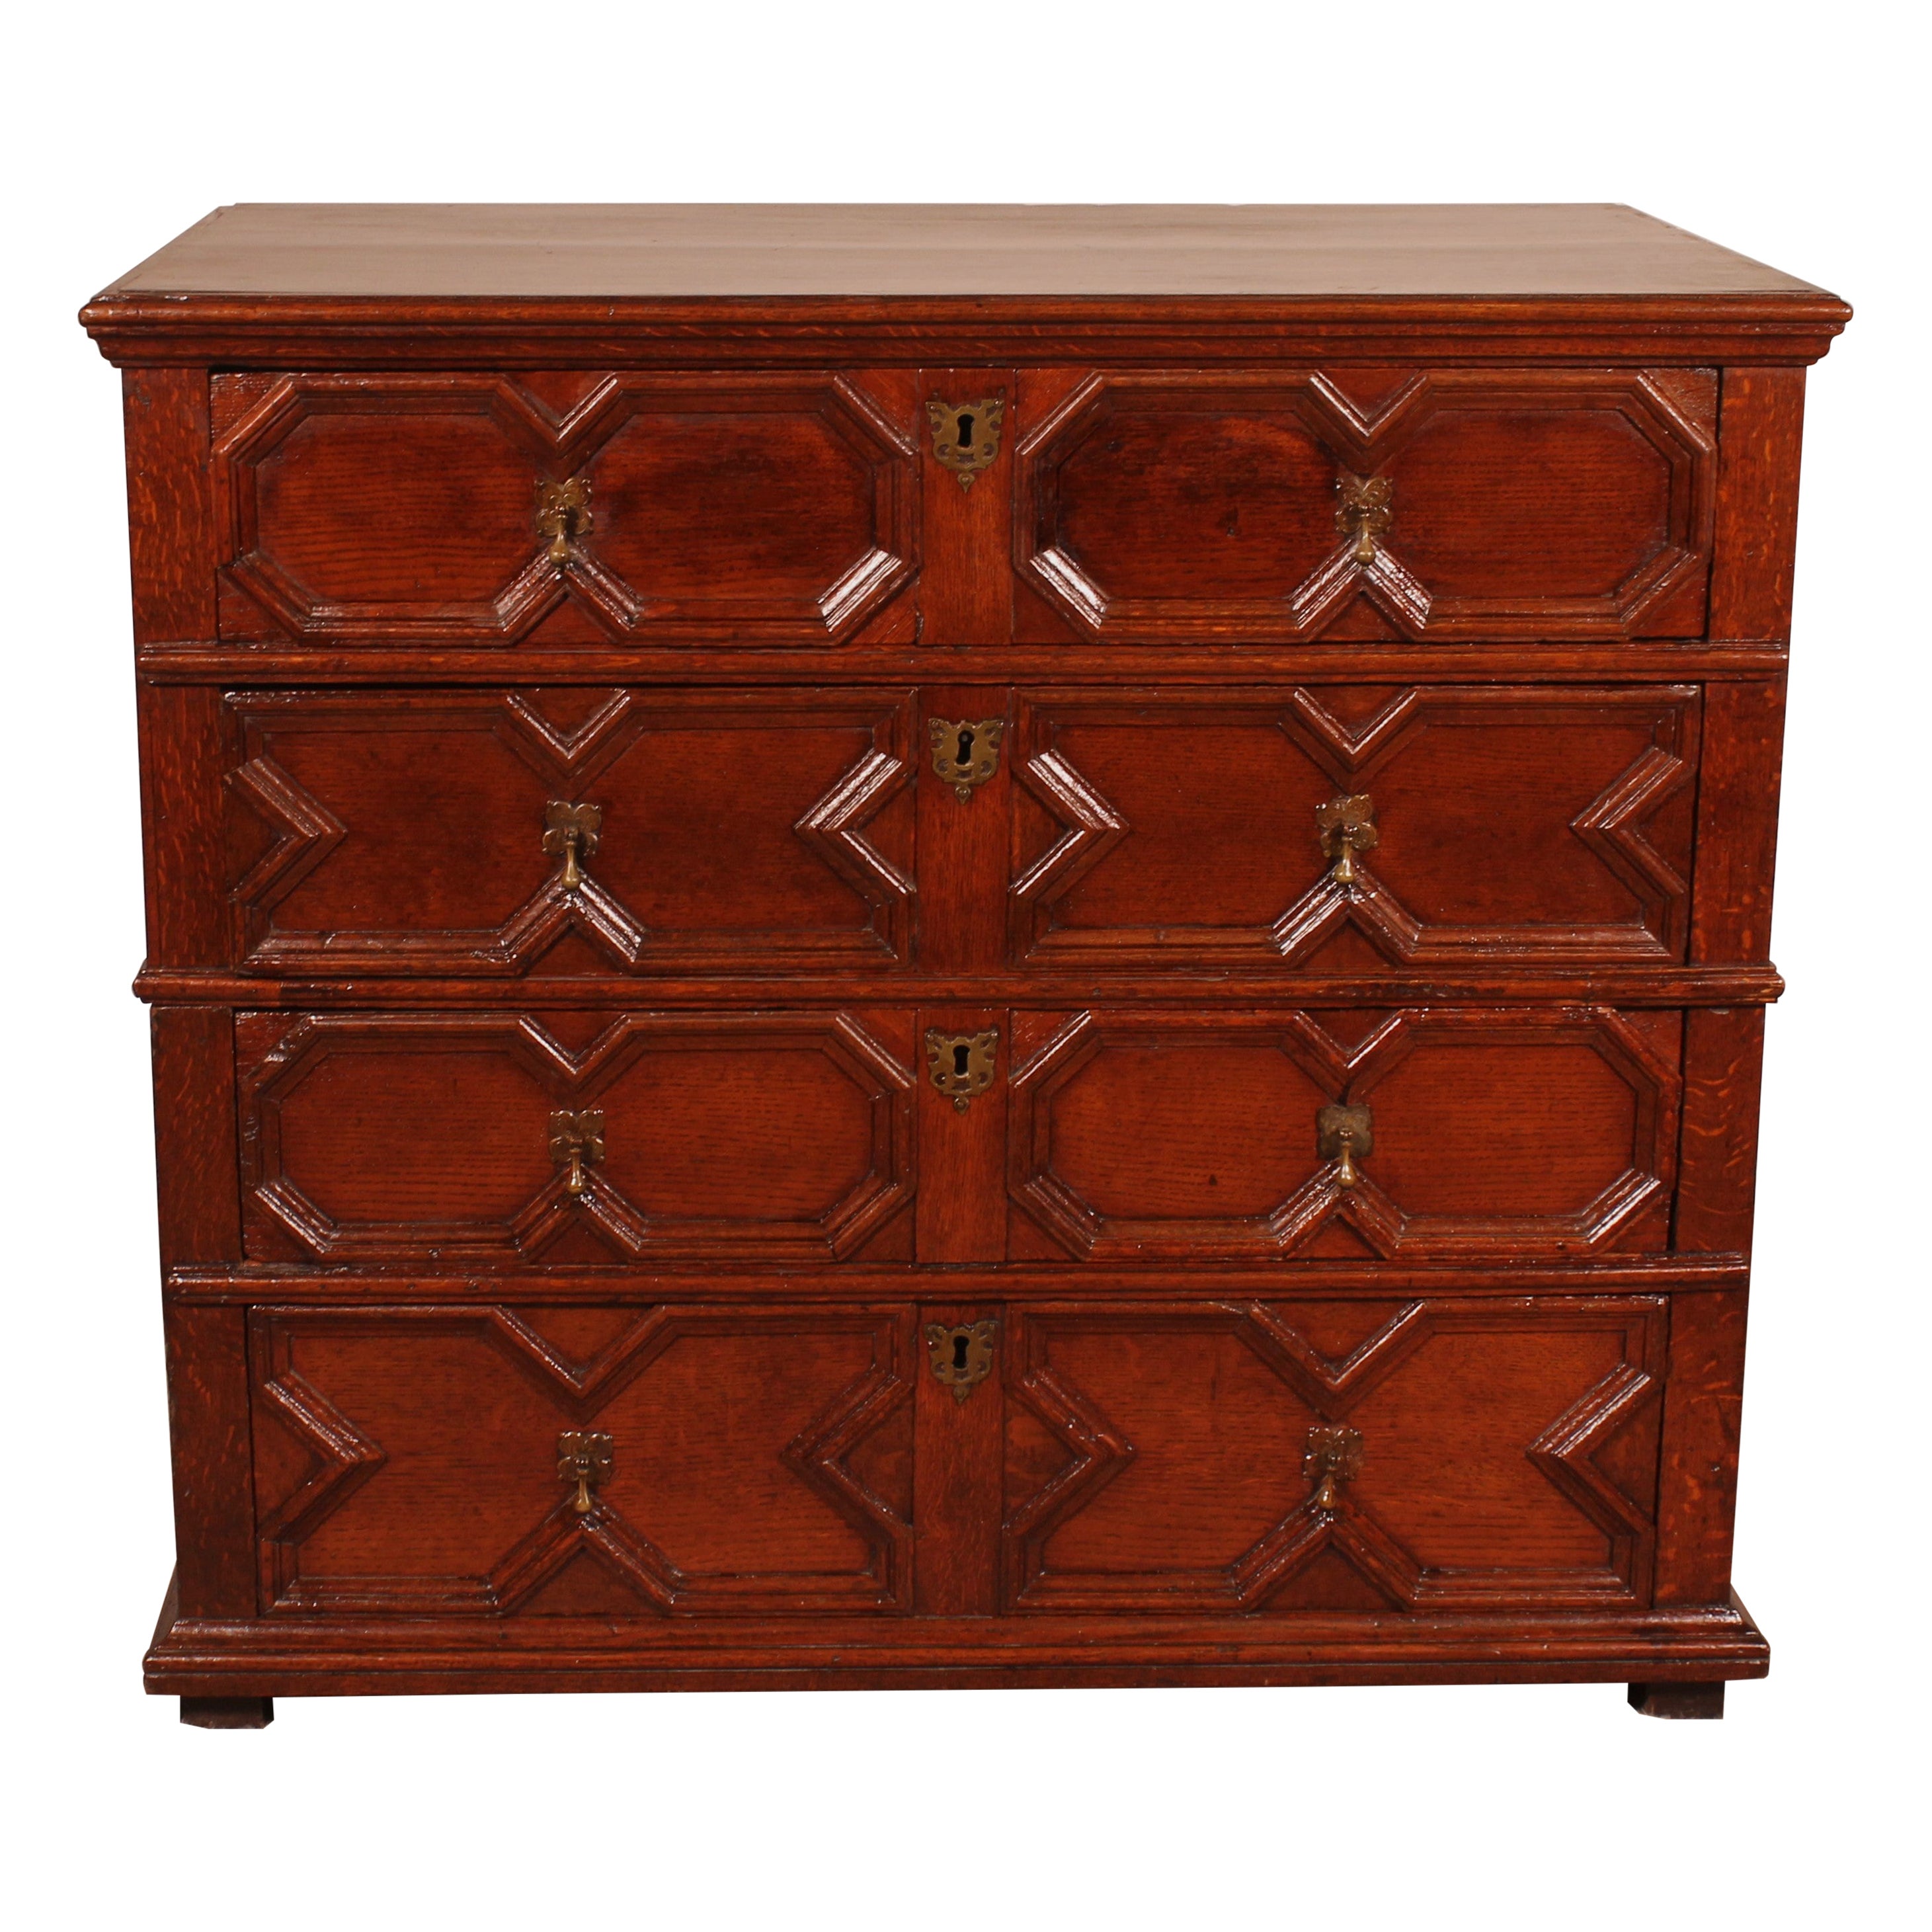 Jacobean Period Chest Of Drawers In Oak From The 17th Century